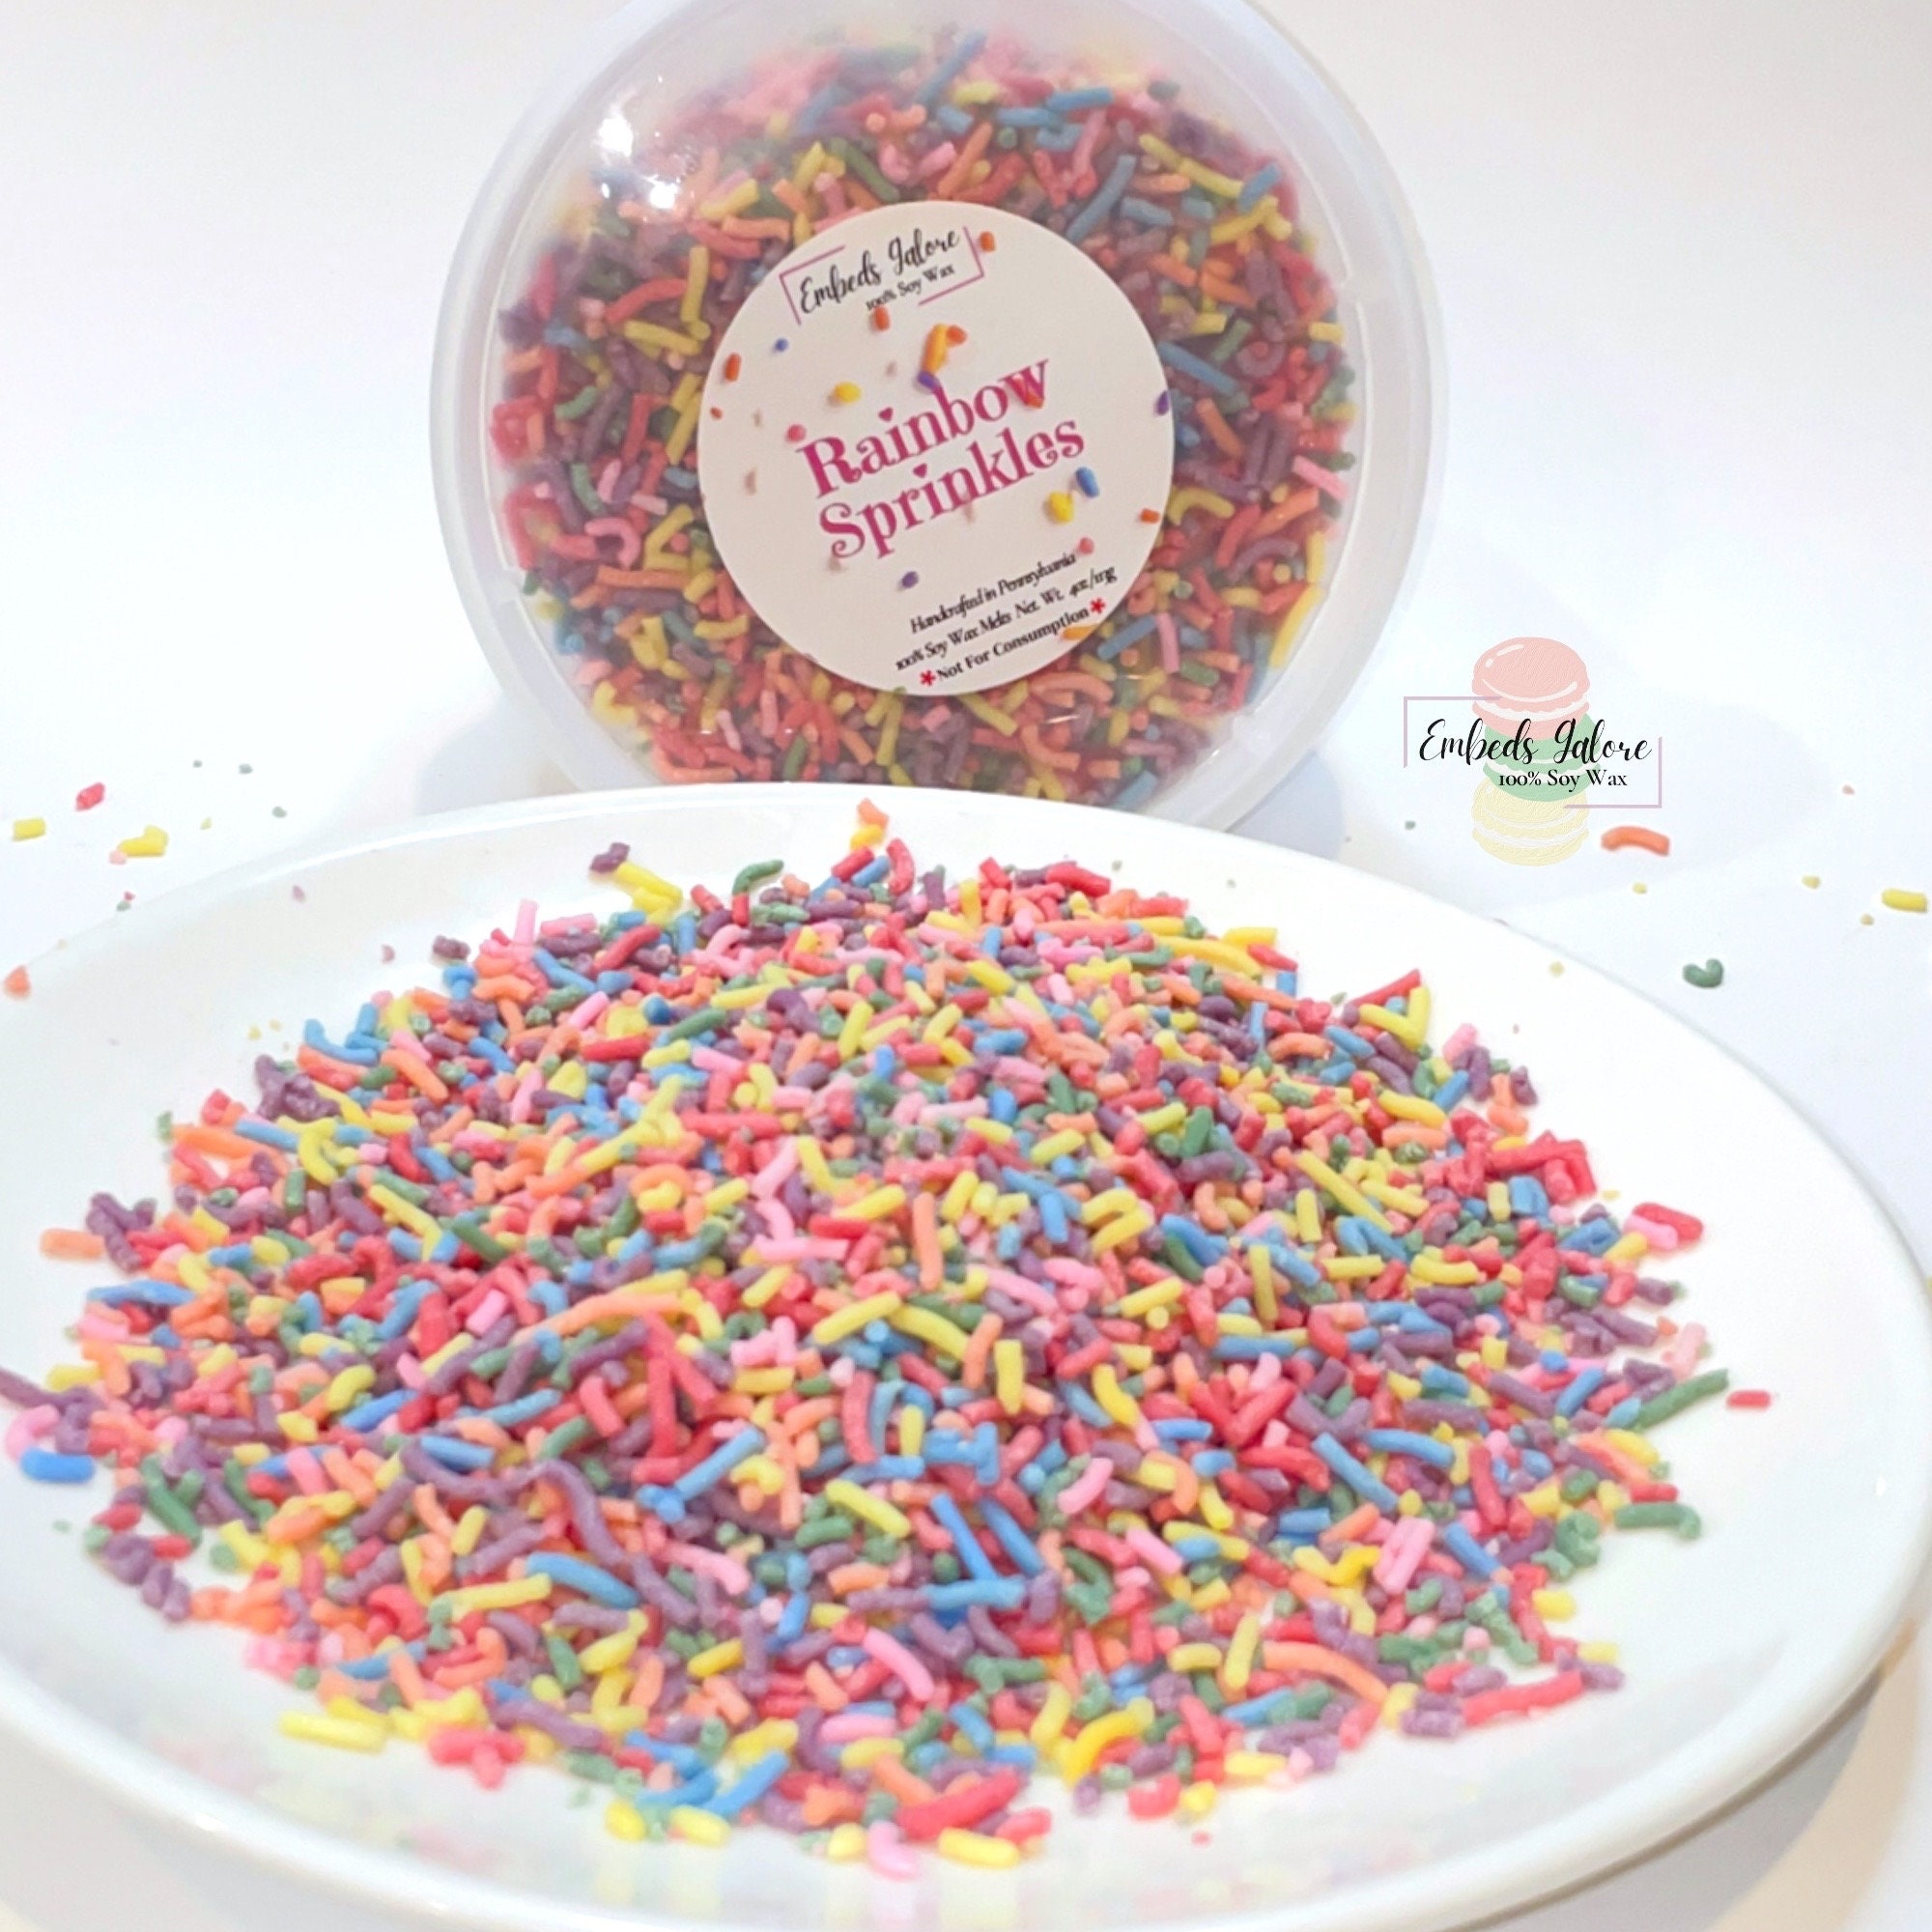 A Sprinkle and a Dash My Edible Candles - set of 4